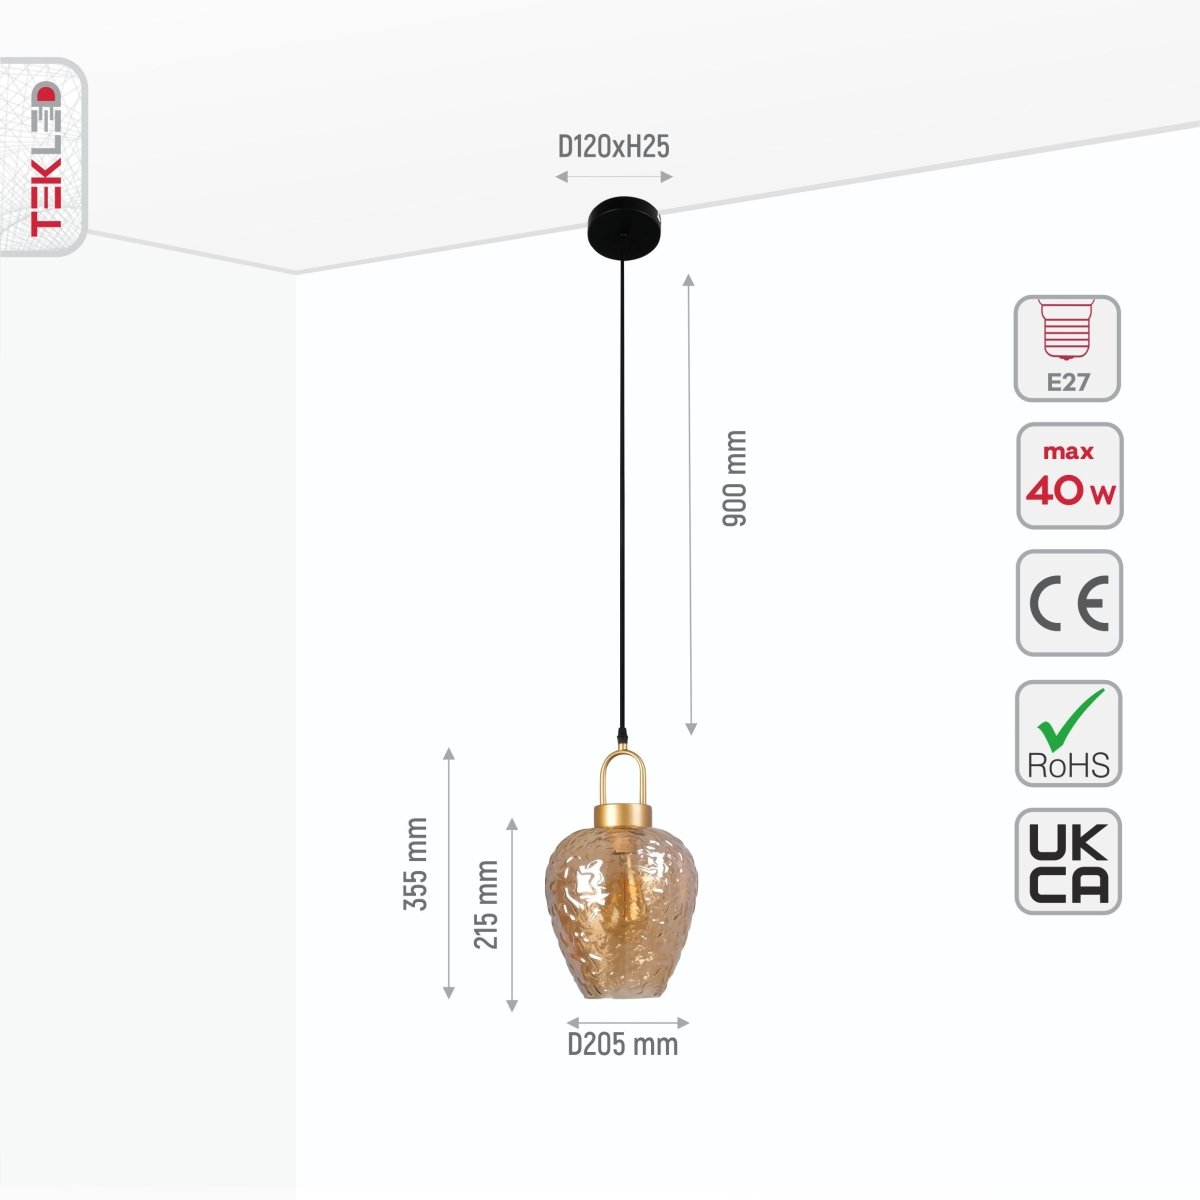 Size and specs of Miele Lungo Amber Glass Pendant Light with E27 Fitting | TEKLED 159-17494